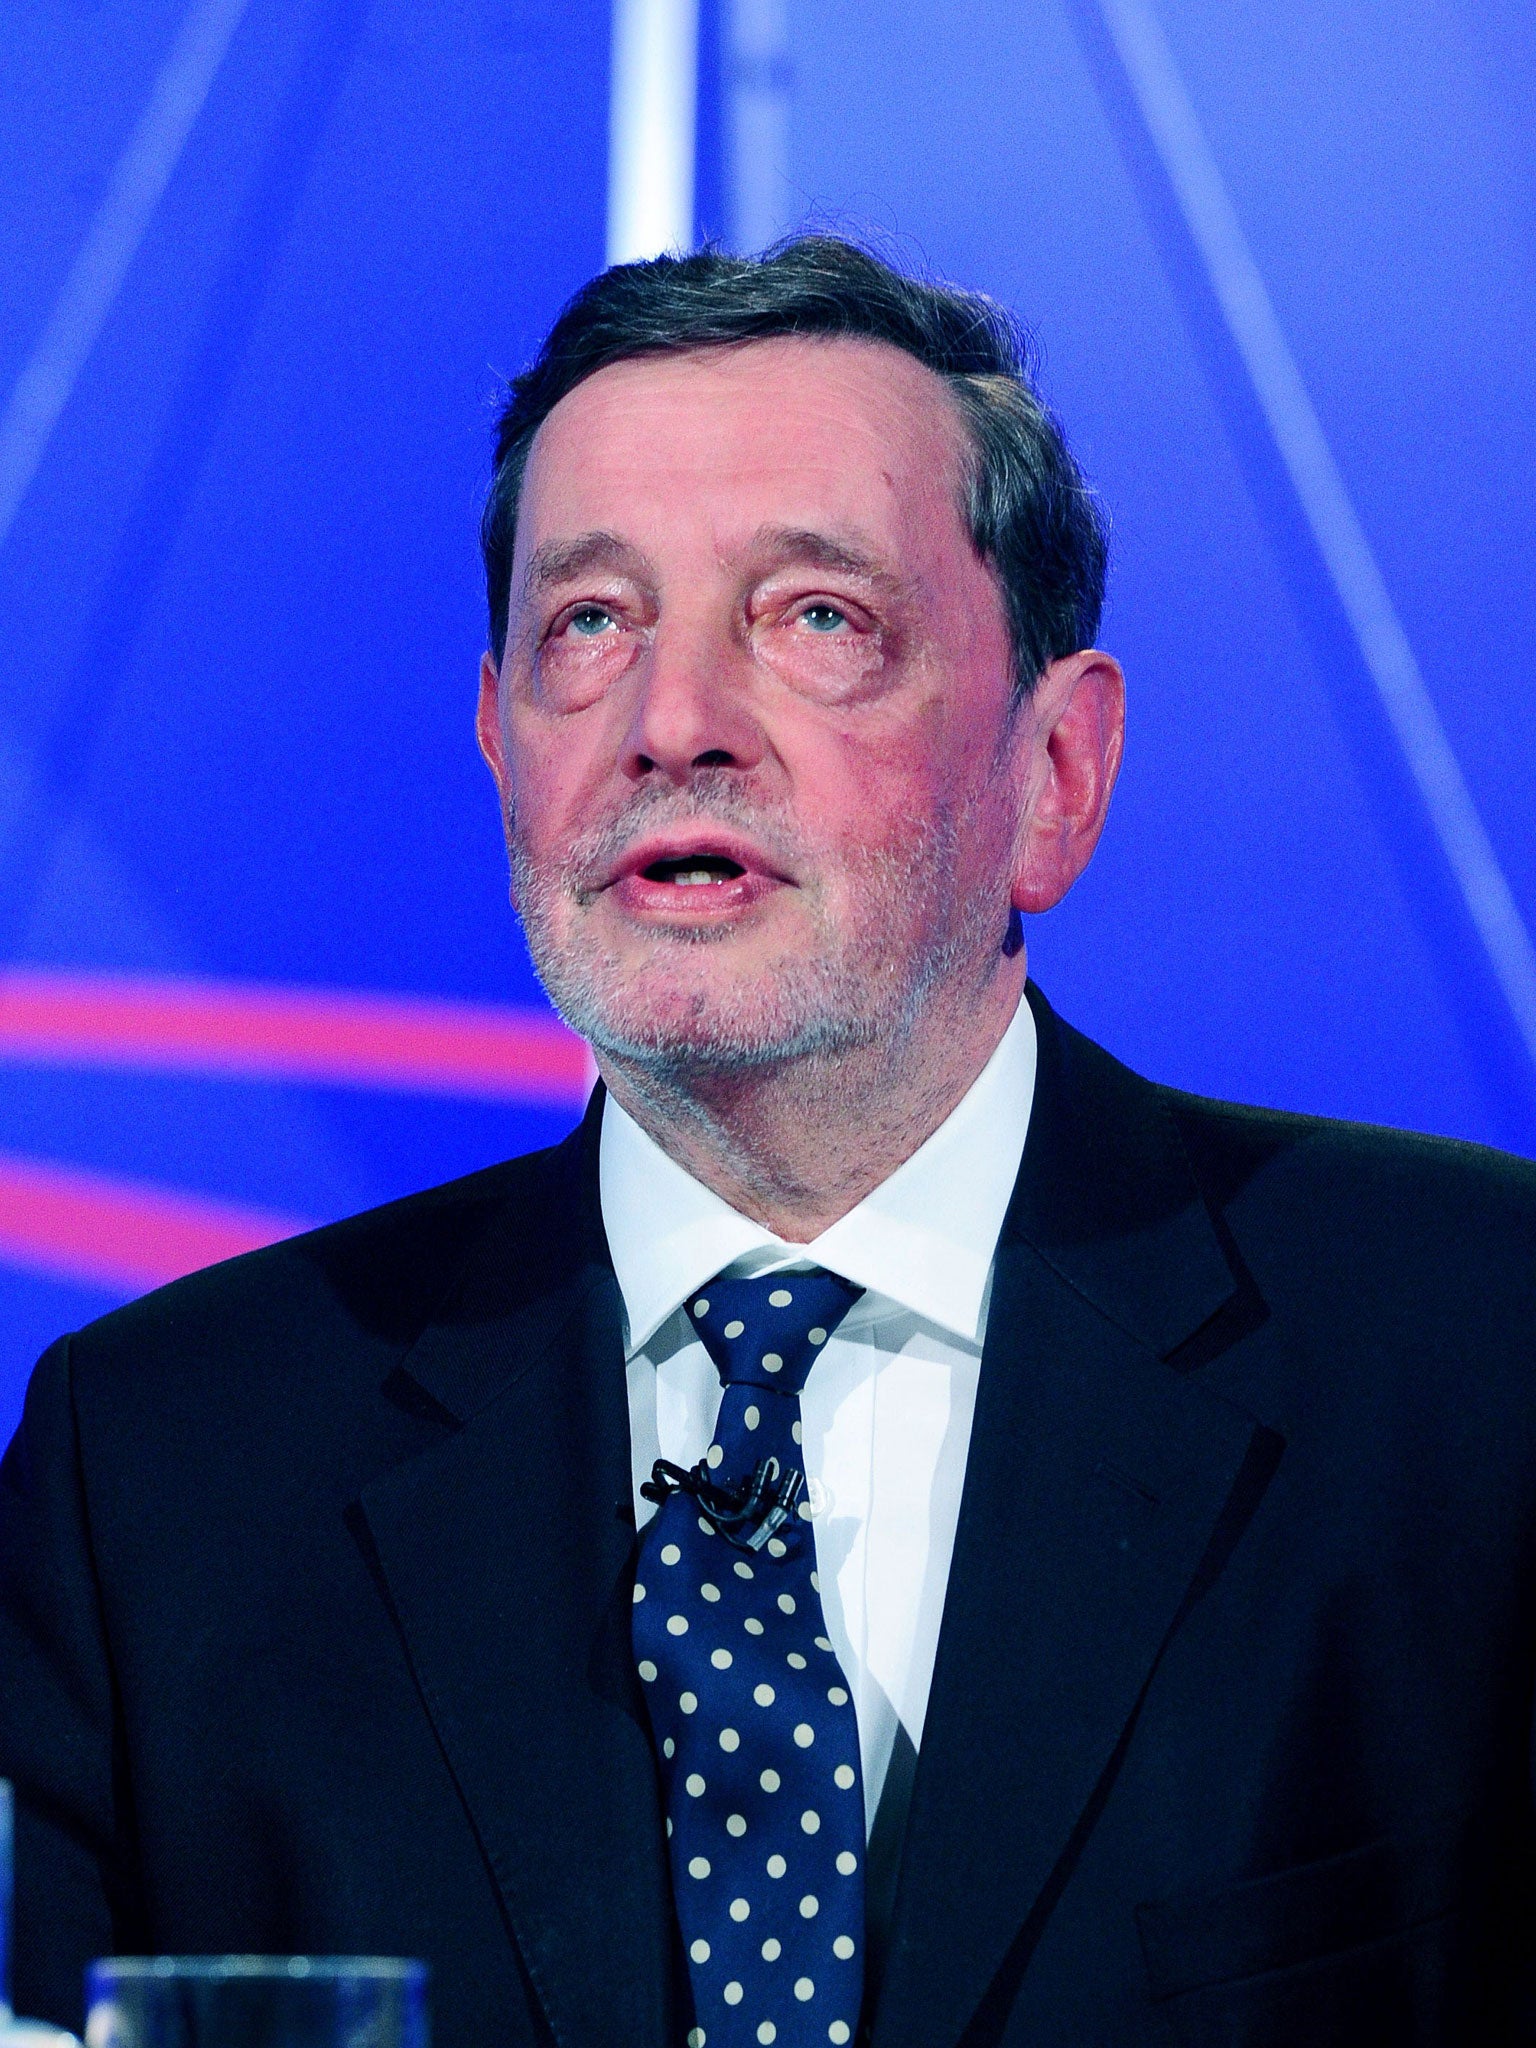 David Blunkett: The former Cabinet Minister has been blind since birth